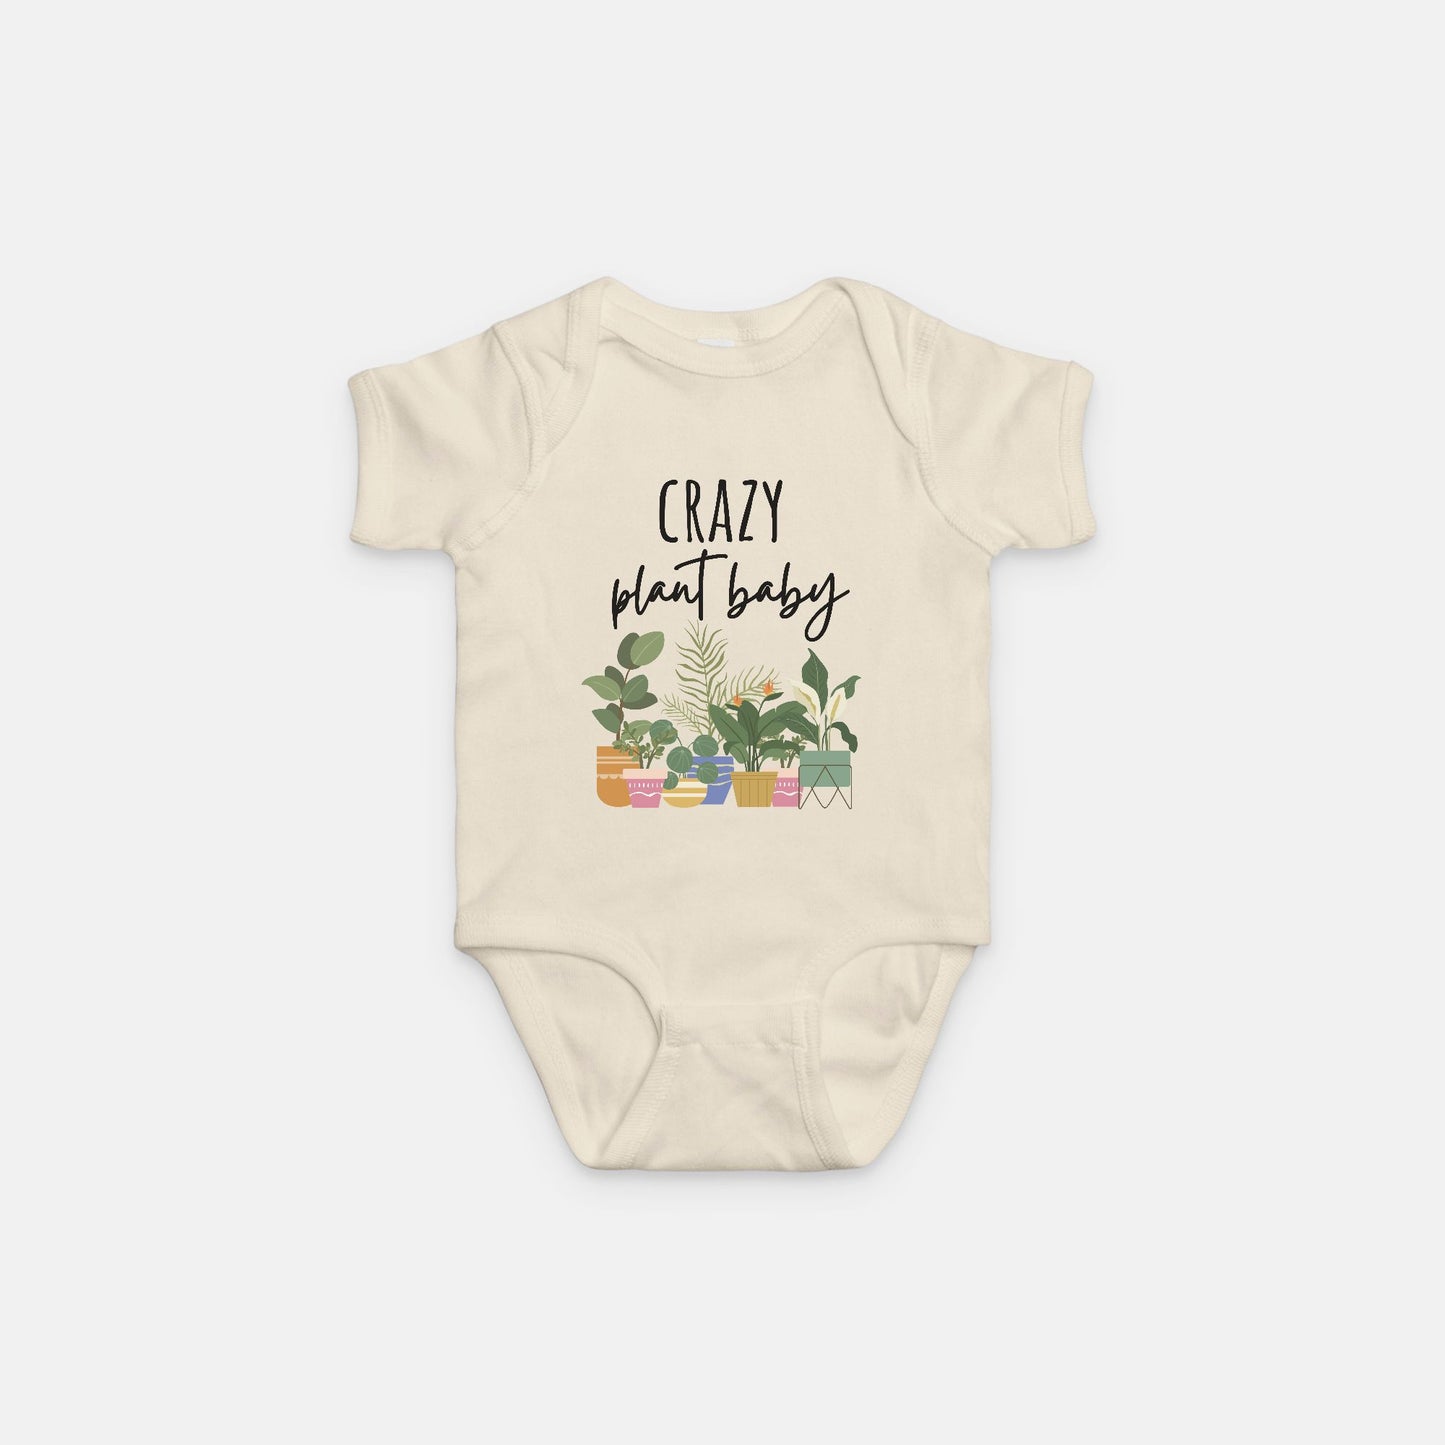 Crazy Plant Baby Bodysuit - Natural Plant Lover Baby Shirt - Mommy and Me Set